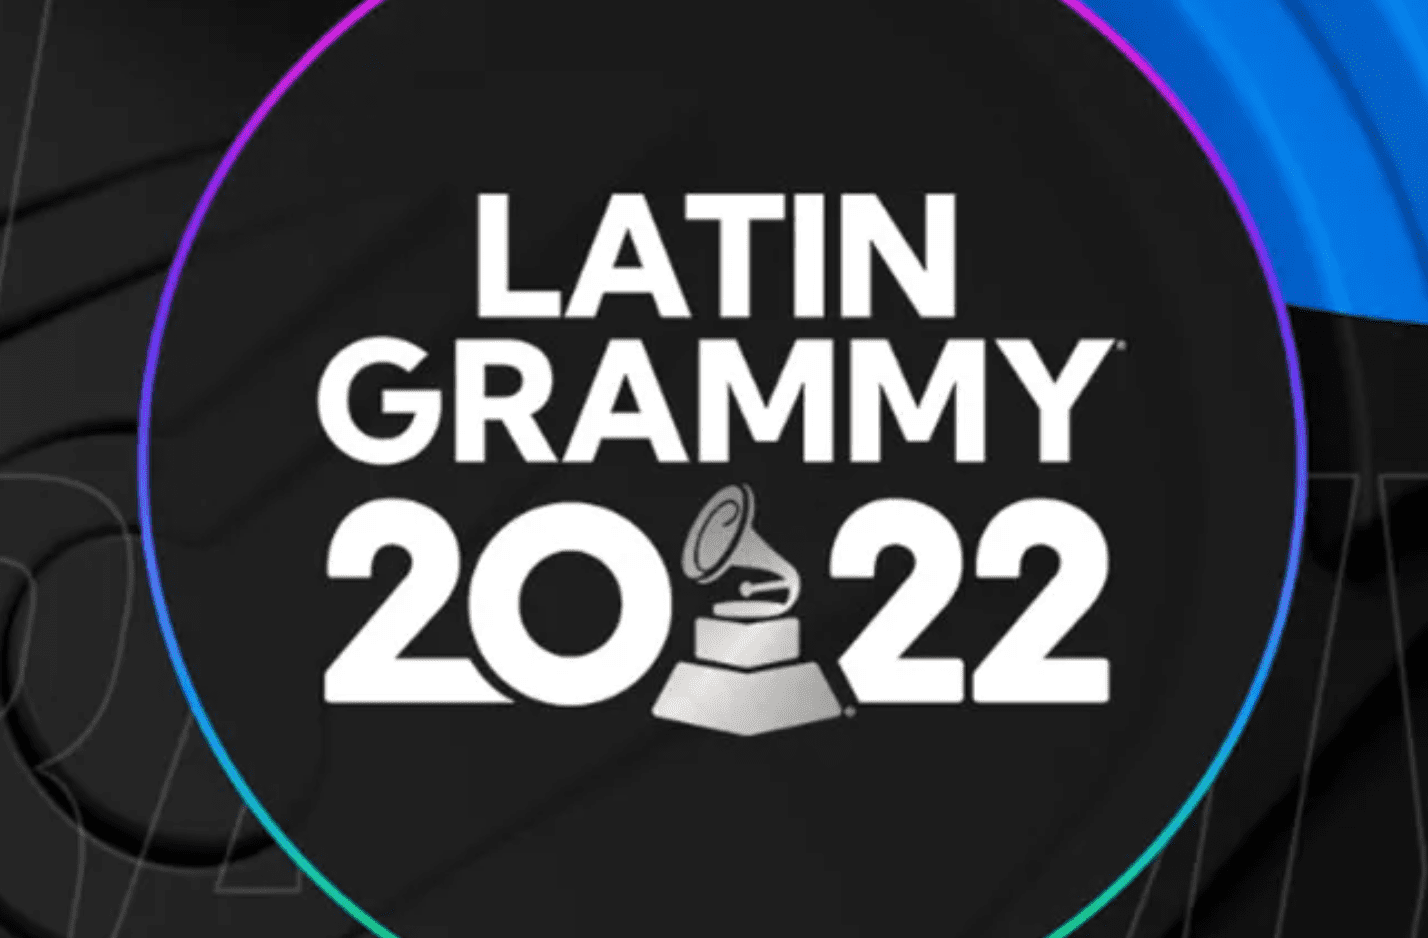 OneOf Latin Grammy Awards announces additional performers